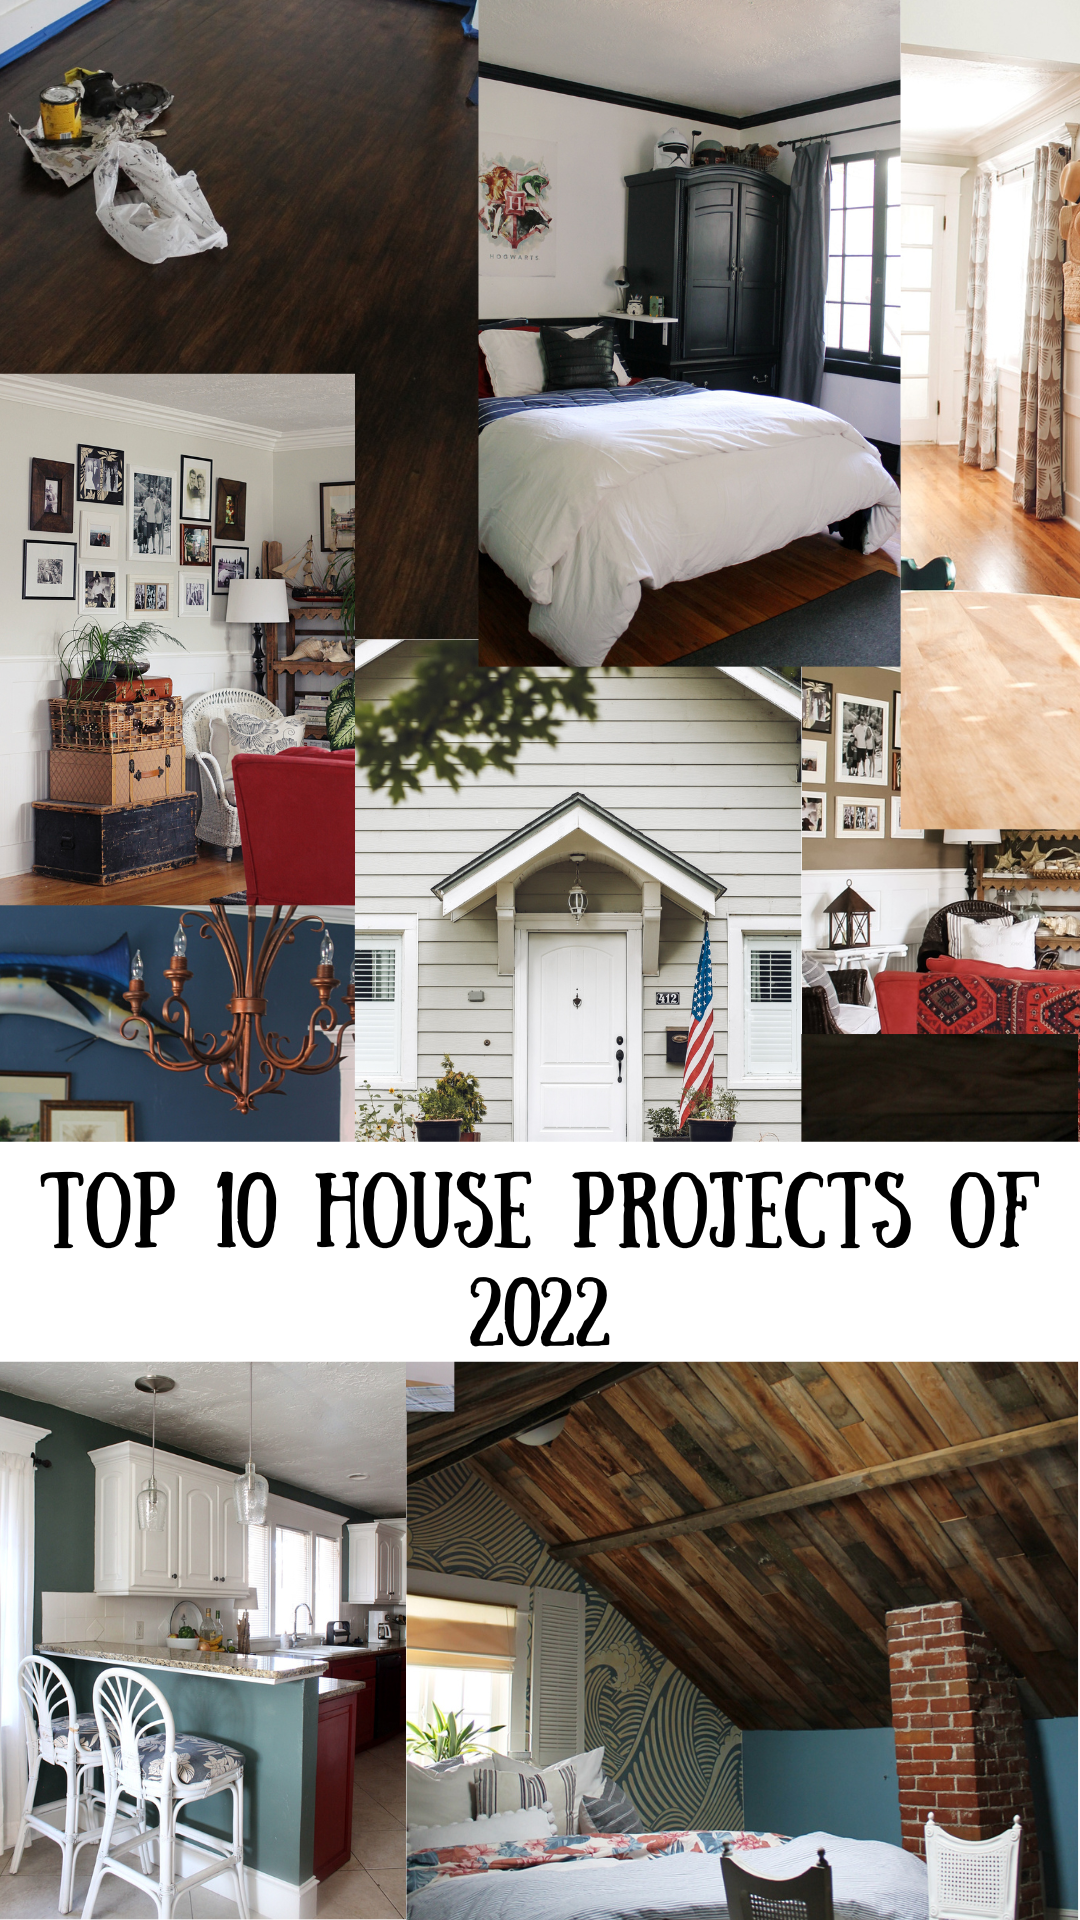 Top 10 House Projects of 2022